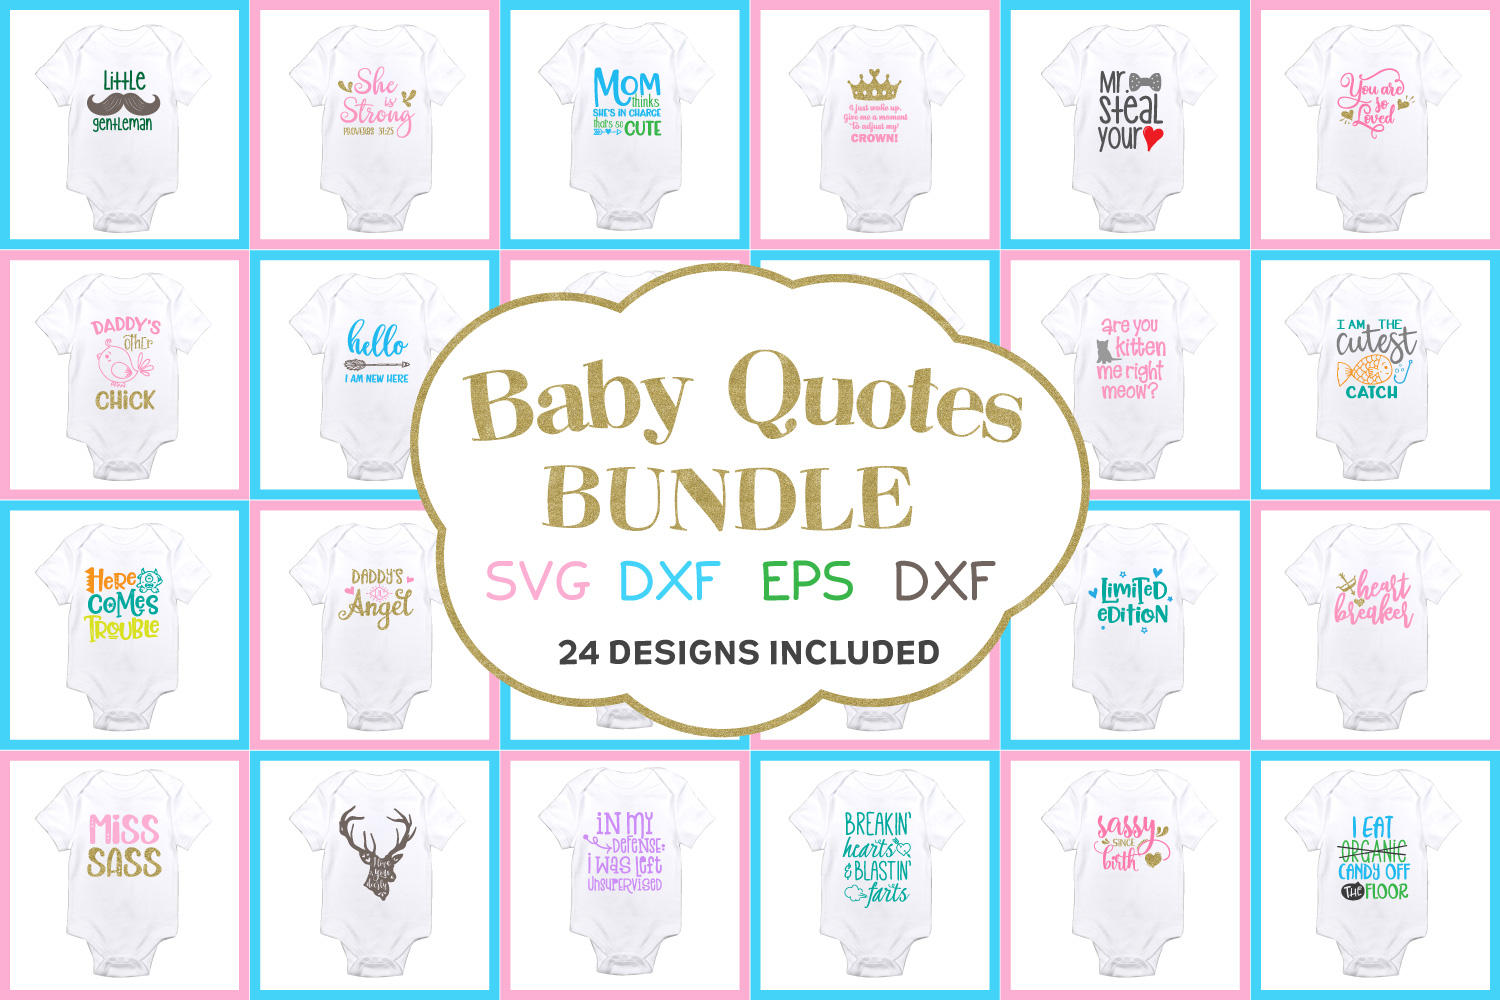 Download Baby Quotes Bundle SVG, EPS, DXF, PNG